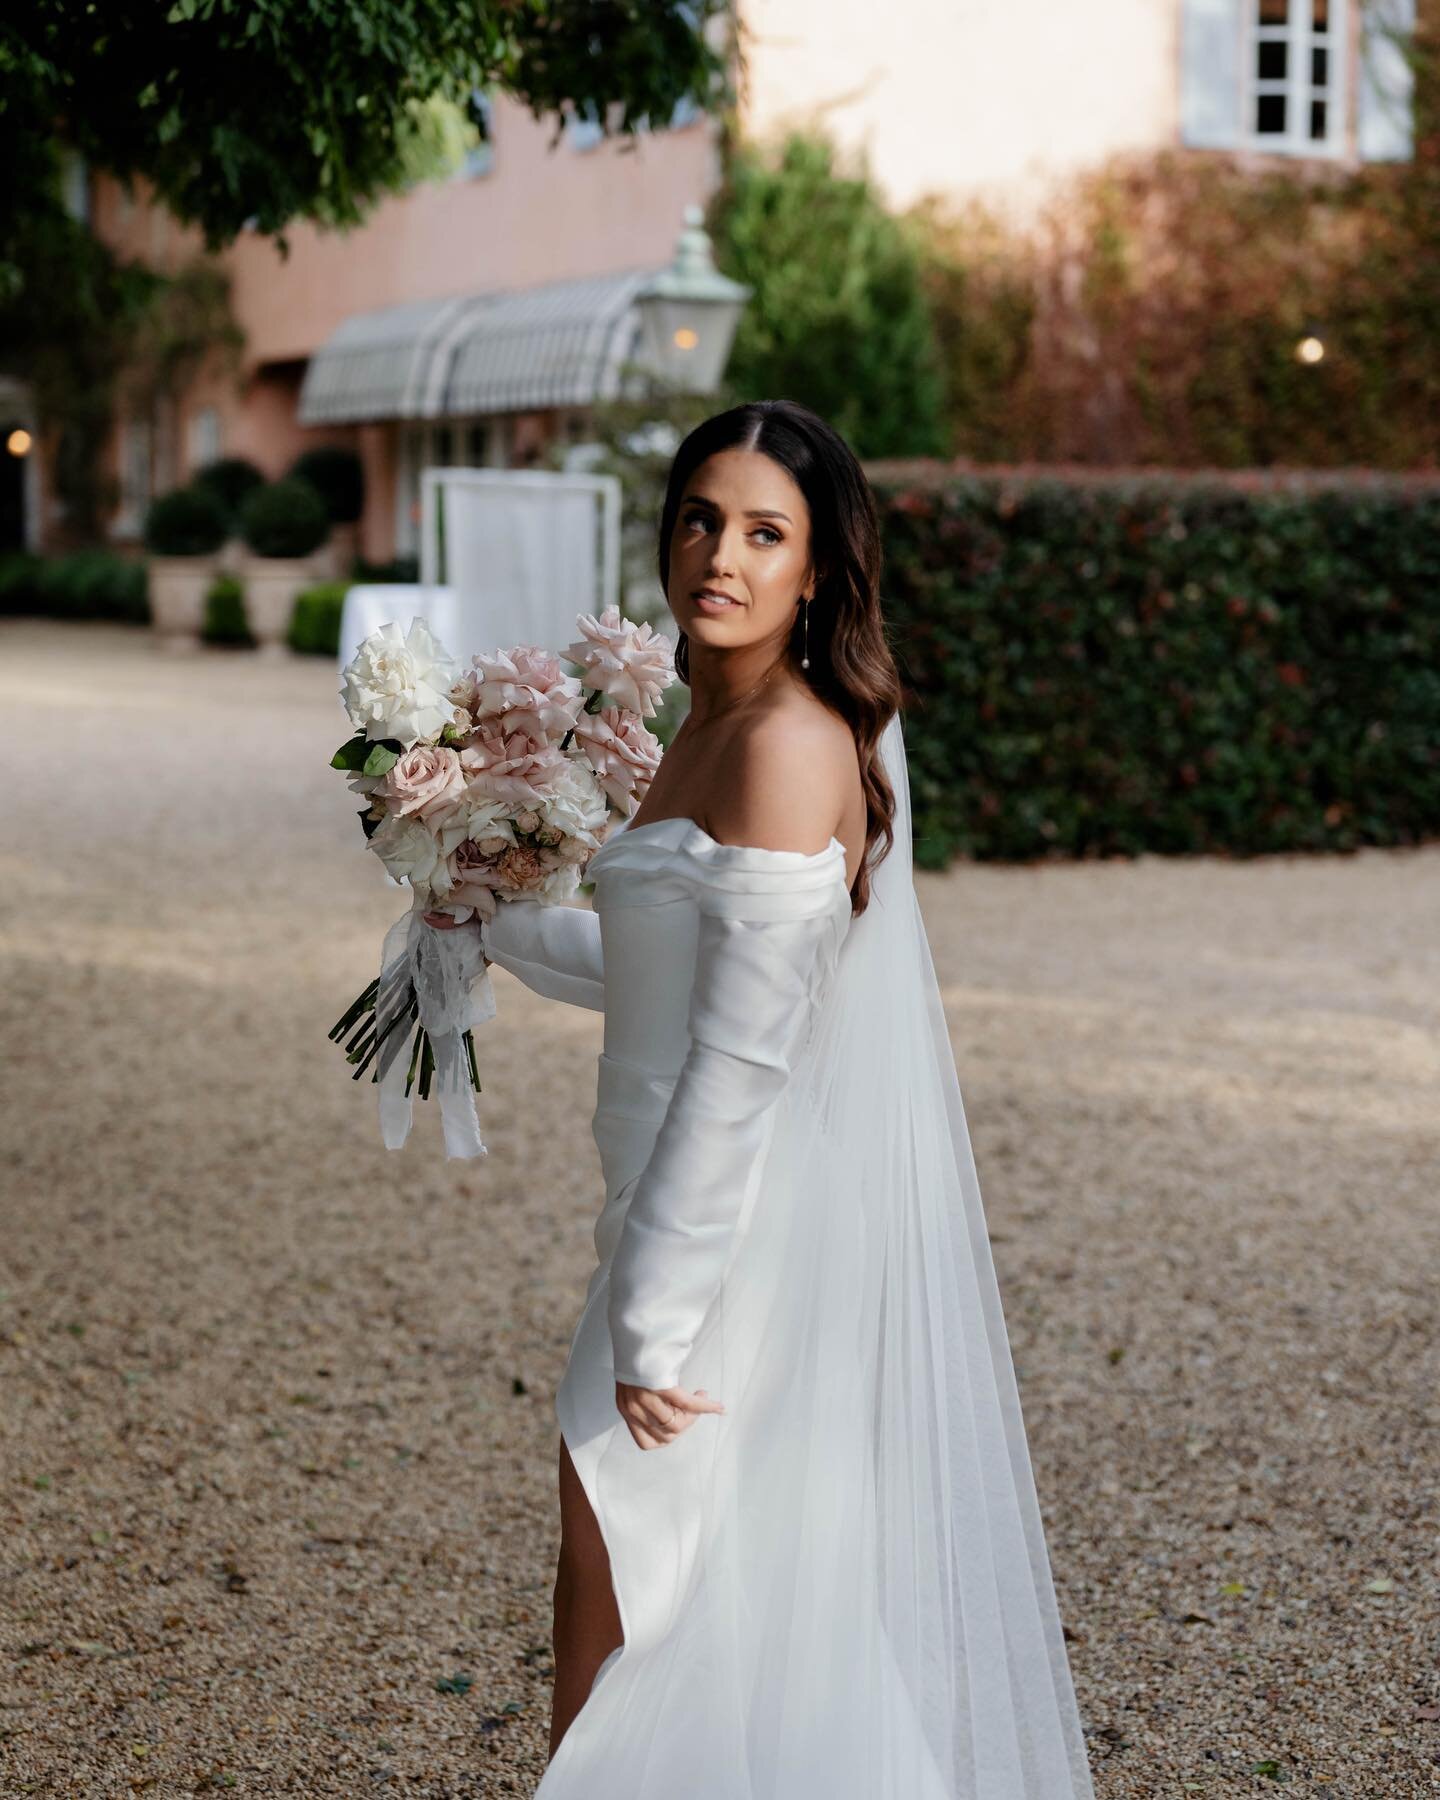 SARAH 💫

An absolute vision! 

Venue @redleafwollombi 
Photography @alexjack.photography 
Florals @floralanarchy 
Styling @prettyinwhiteevents_ 
Coordination @yourdaybychloe 
Catering @fennelandco.catering 
Videographer @josuefilms 
Celebrant @jayab